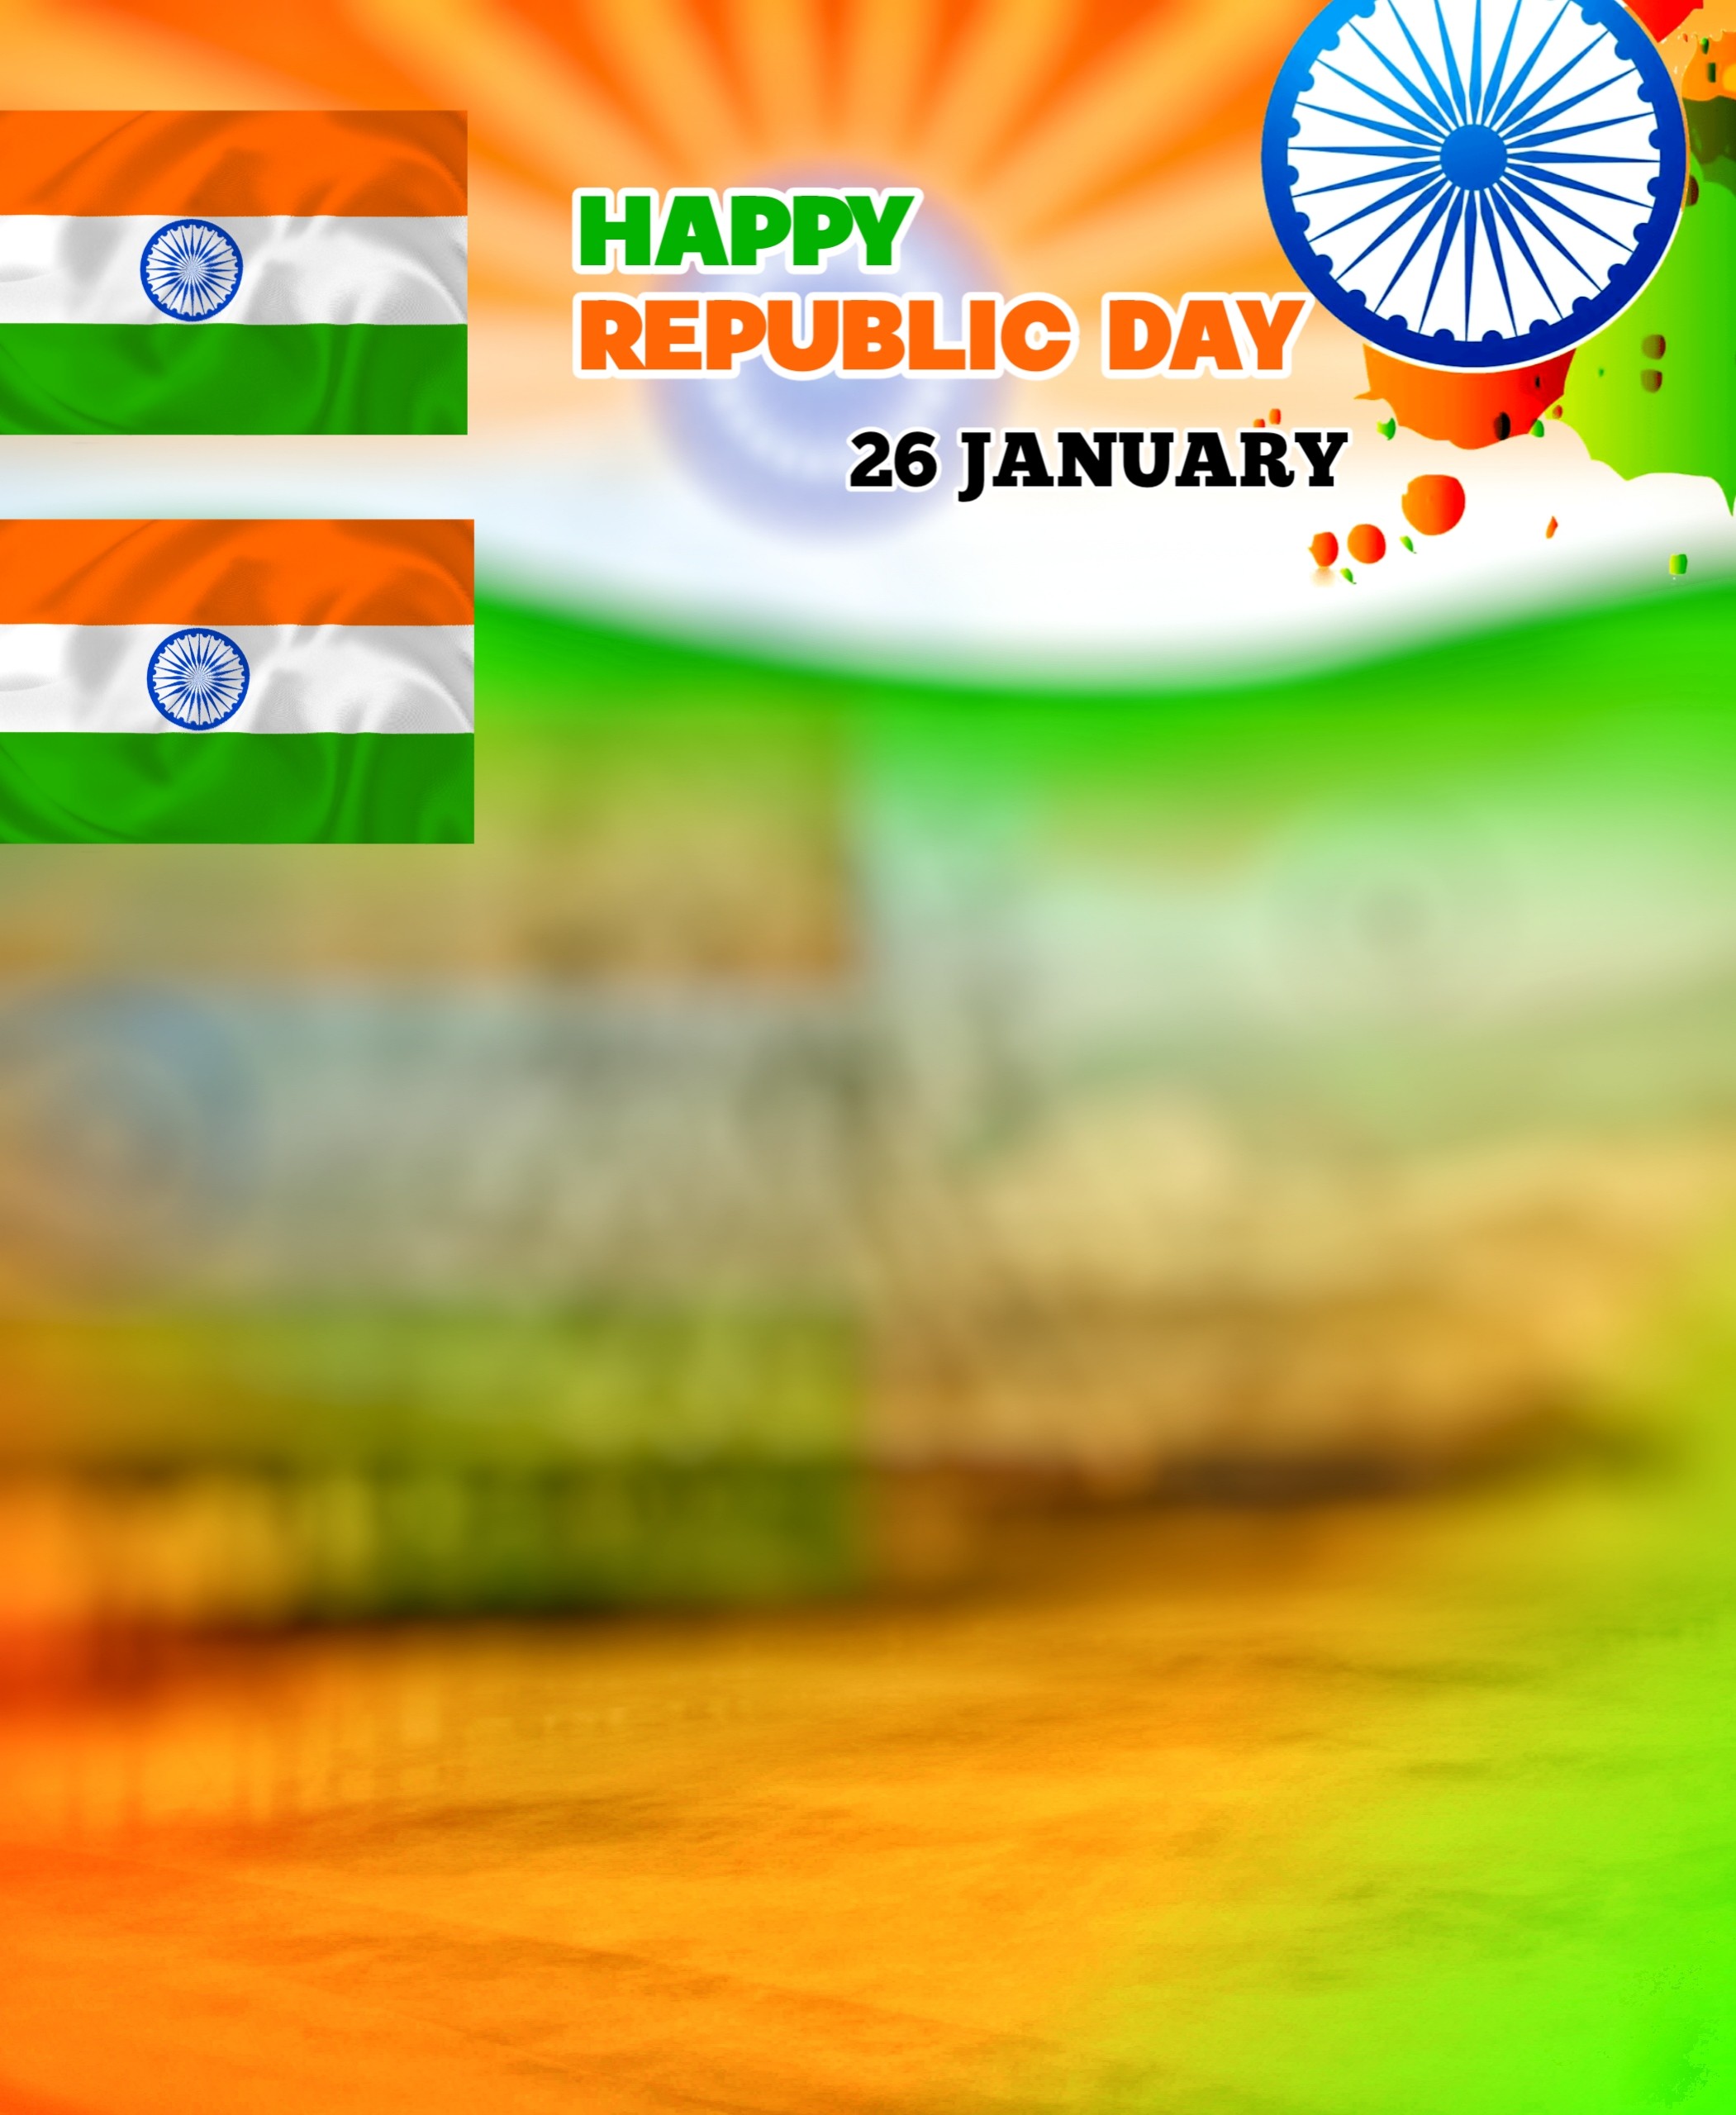 Republic Day Background Image HD